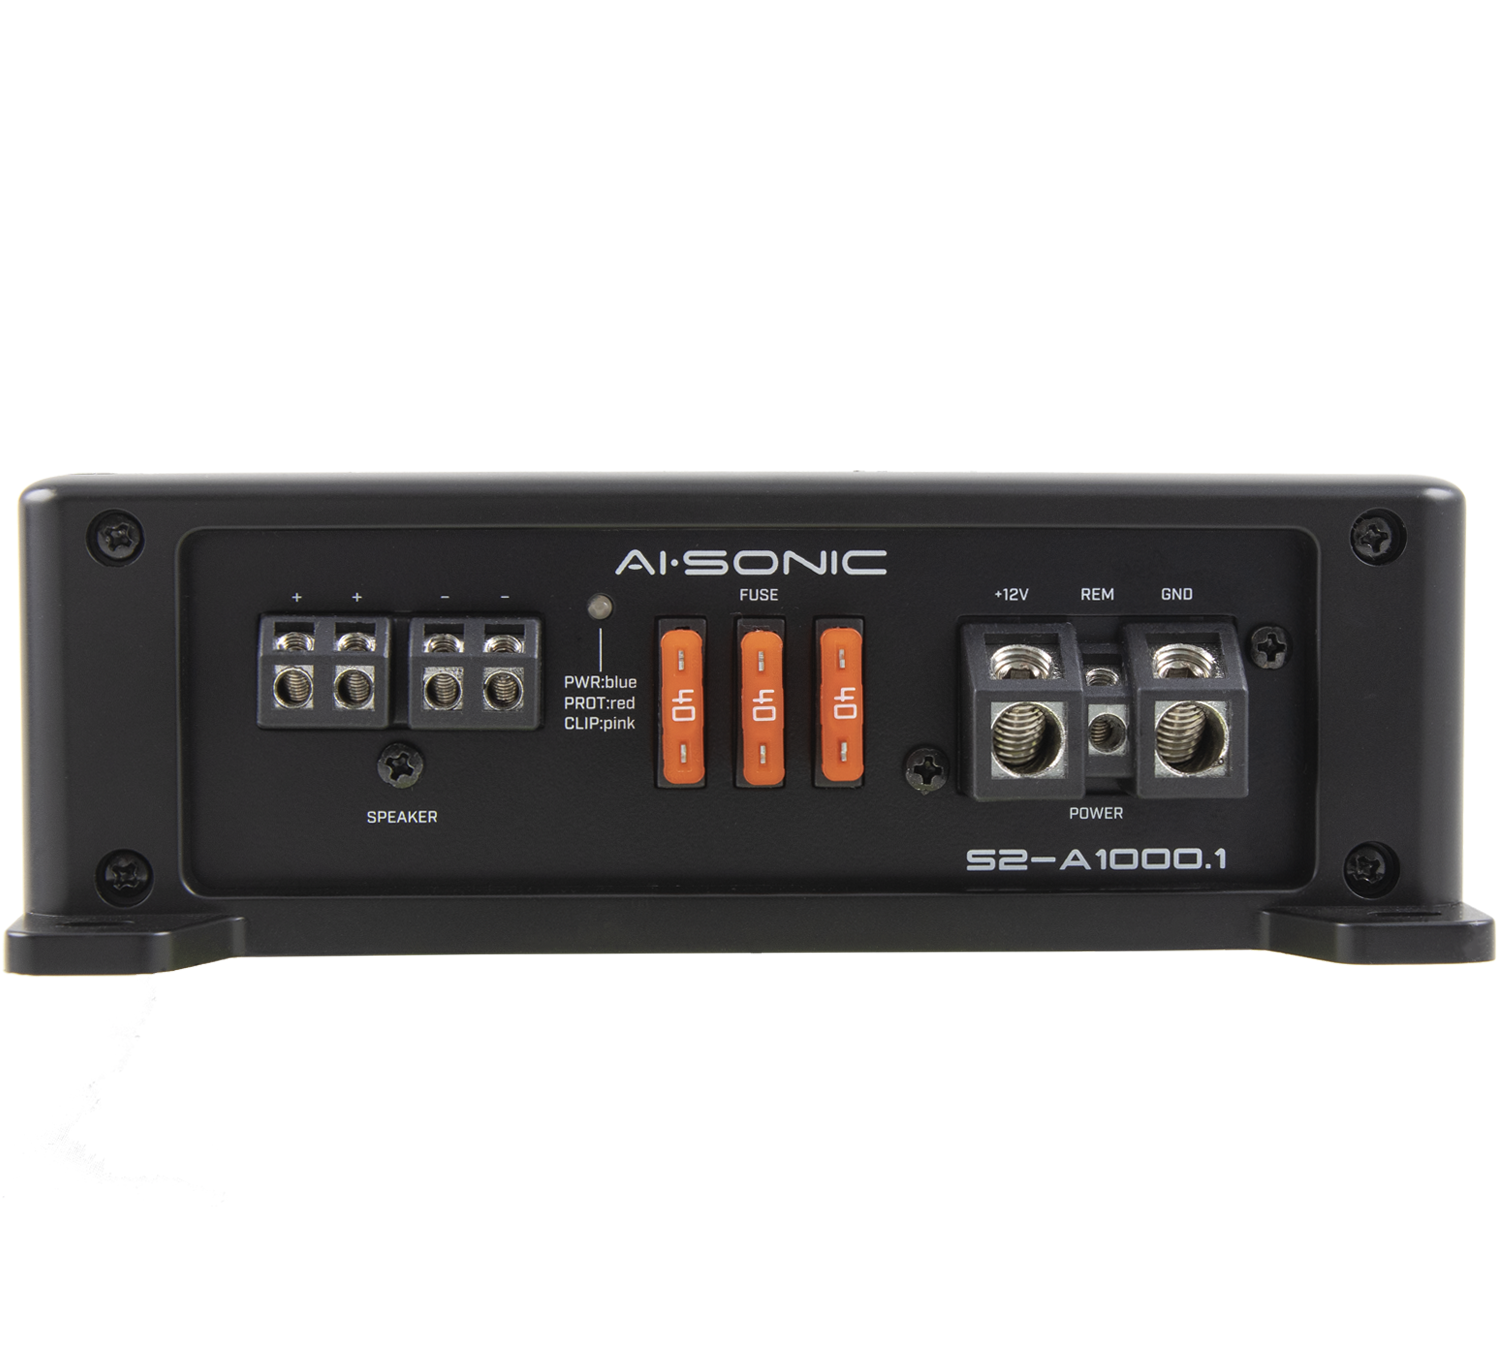 AI-SONIC S2-A1000.1 with S2-BASS KNOB